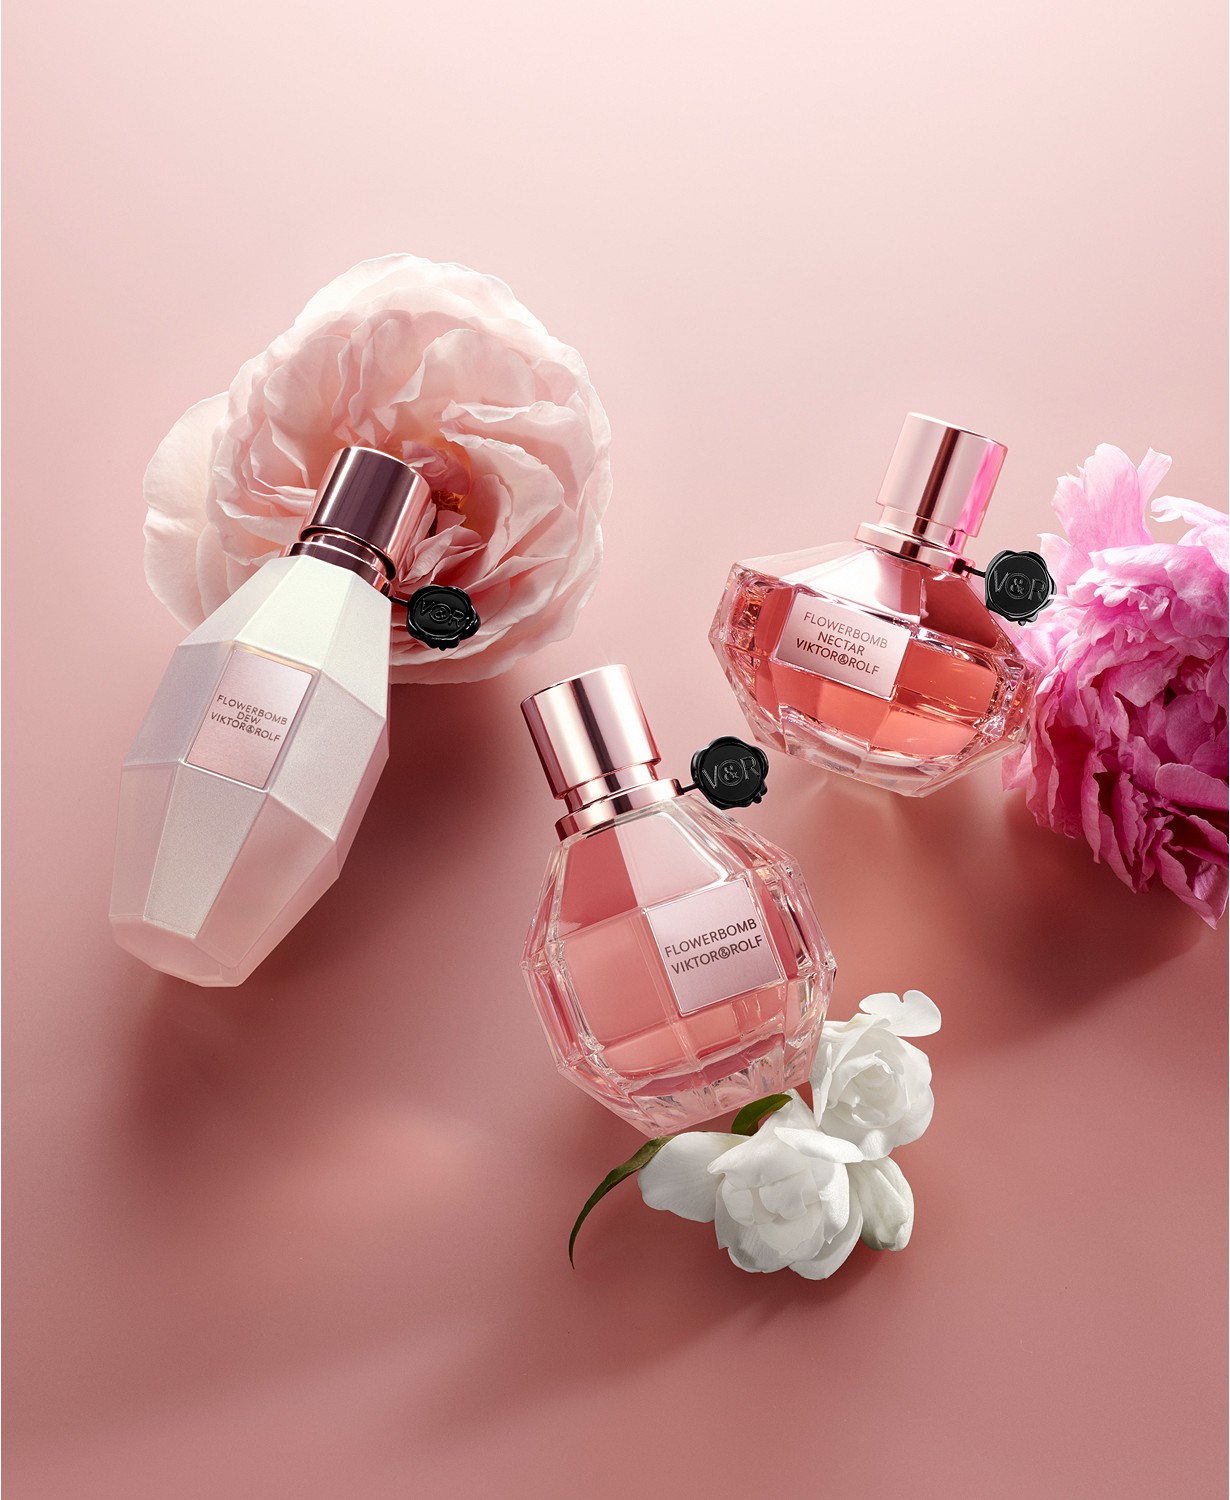 Viktor&Rolf Flowerbomb Pearly Coral Pink Limited Edition